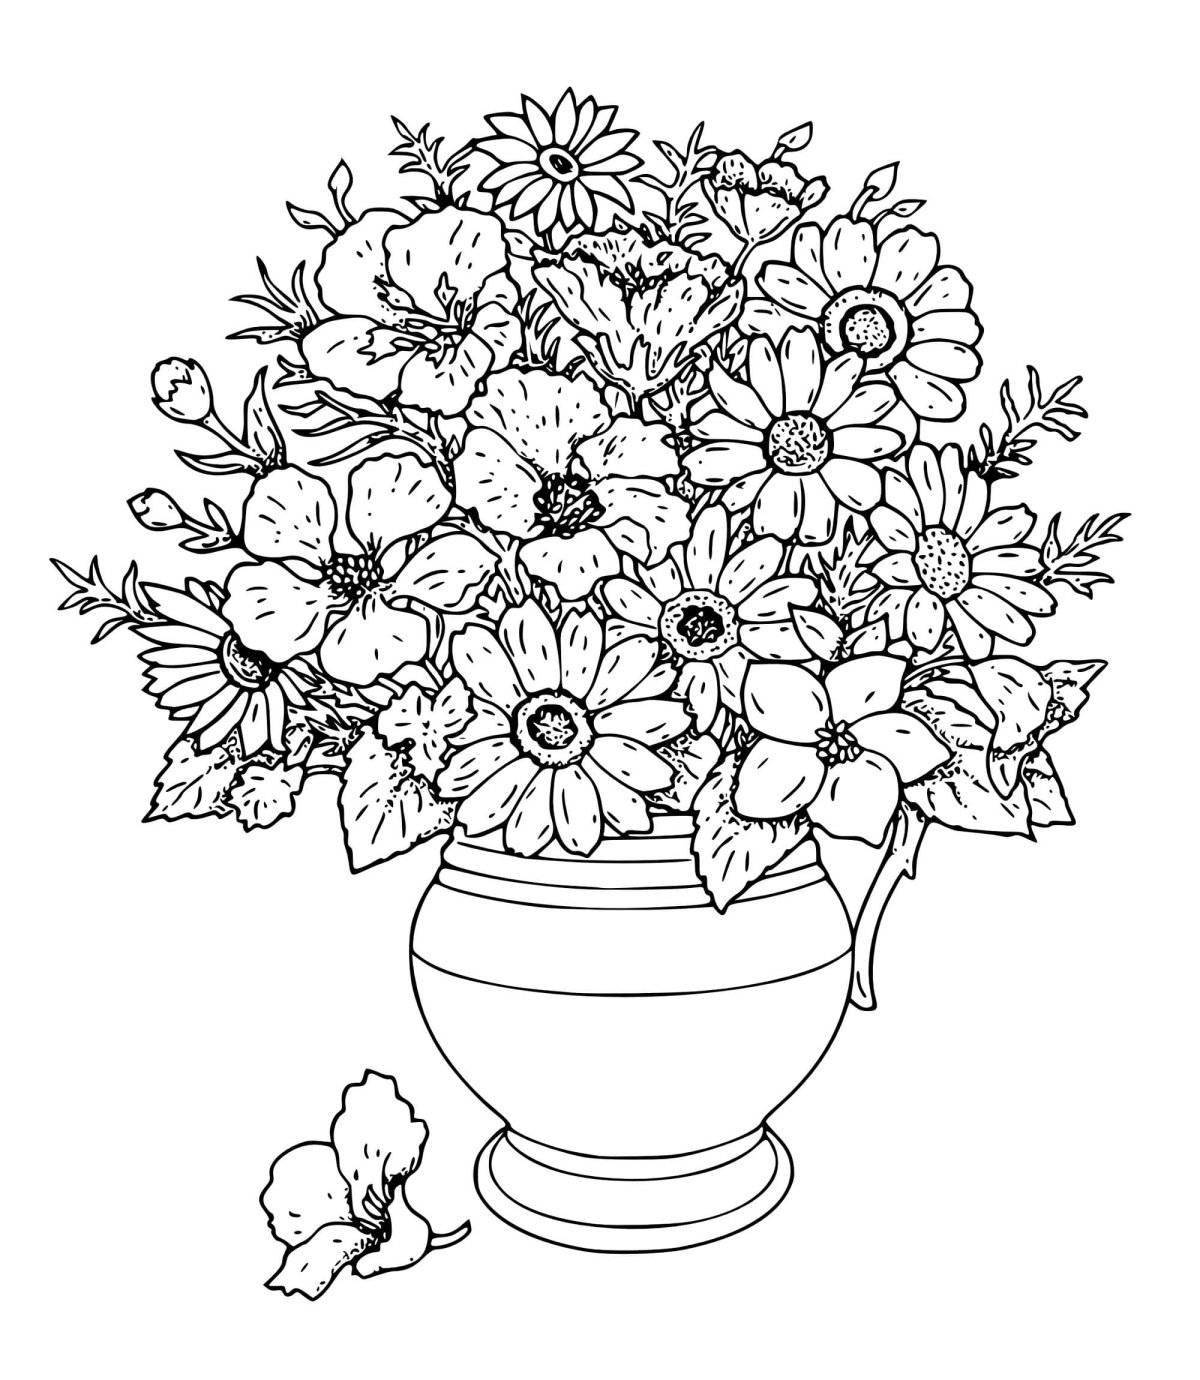 Fun coloring flowers in a vase for teens